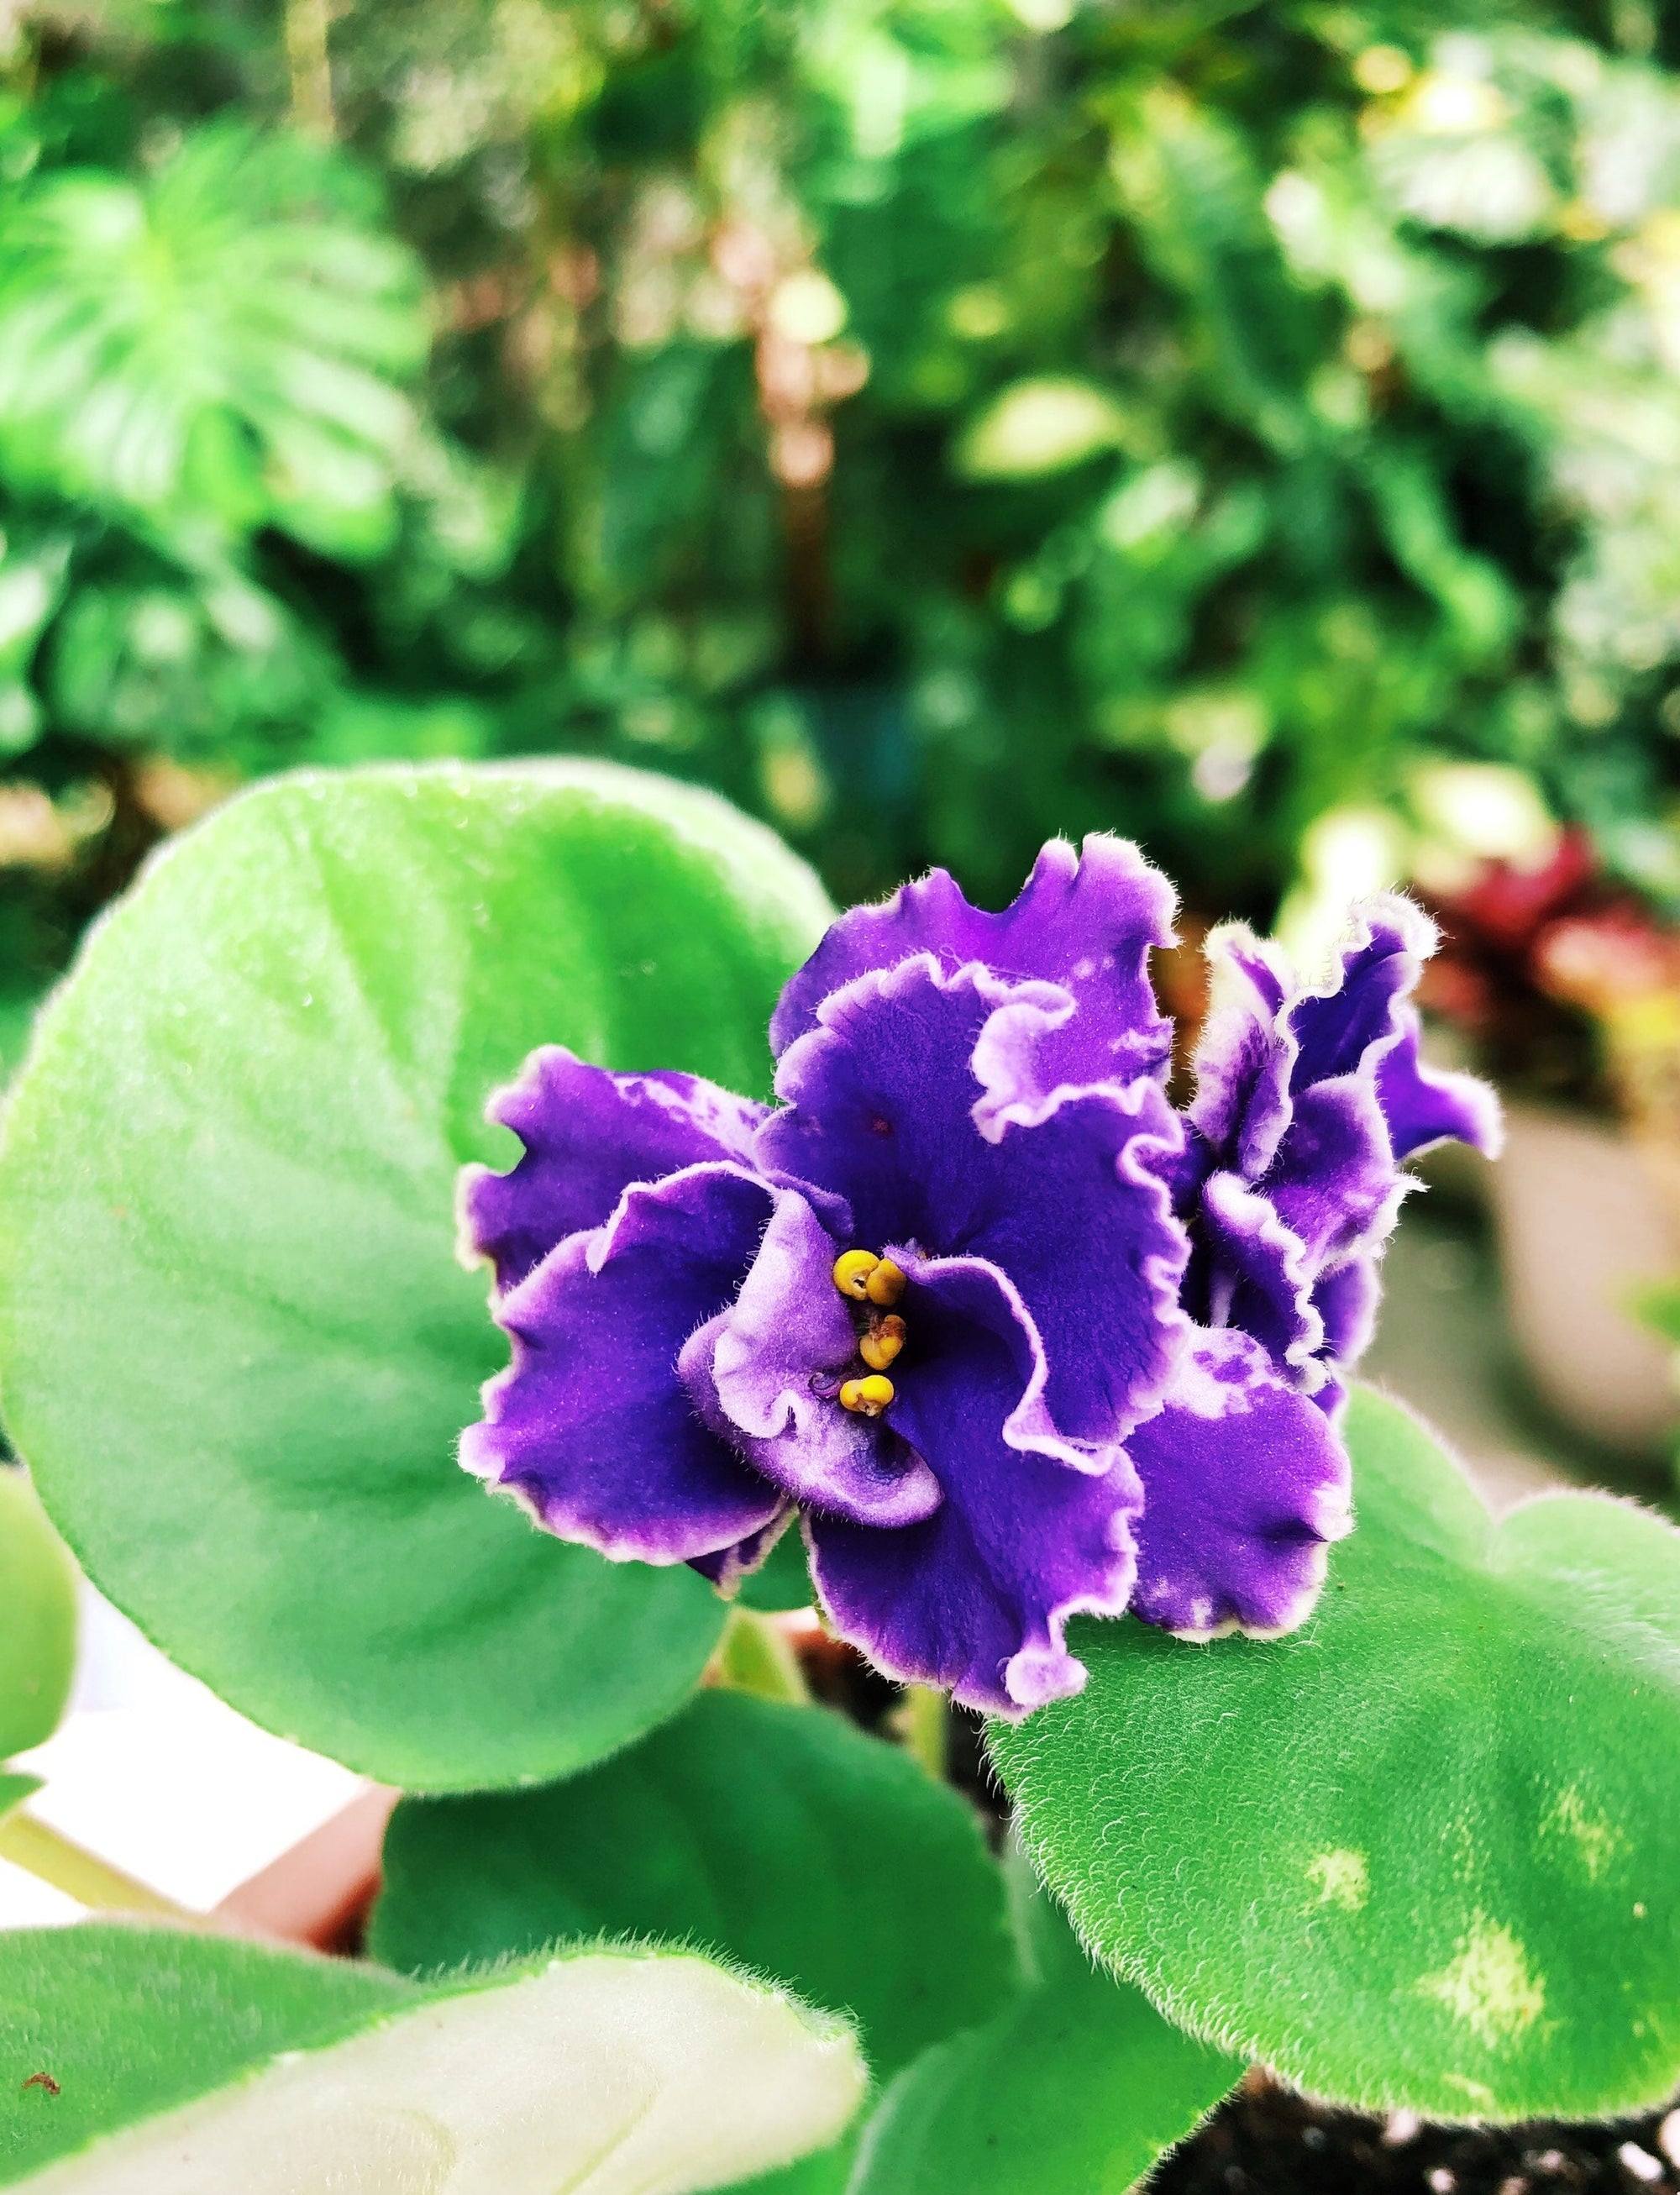 Live house plant variegated bloom African Violet Harmonys Rebels Wild Wings garden 4 in flower Potted gift